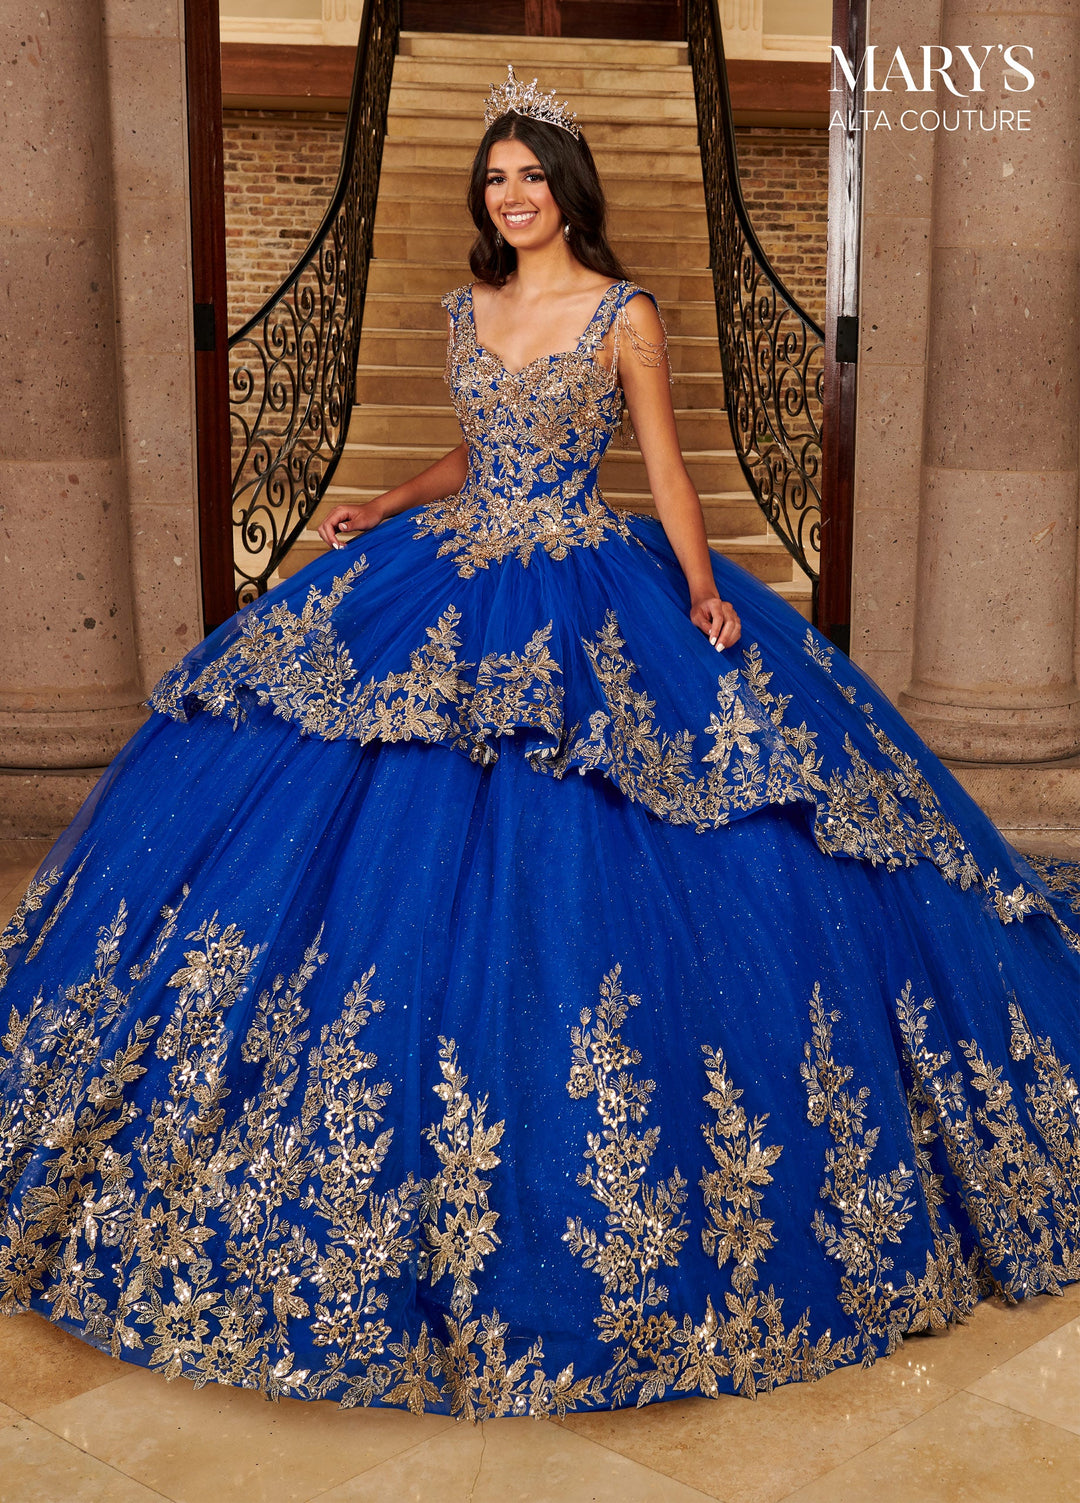 Gold Applique Quinceanera Dress by Alta Couture MQ3079